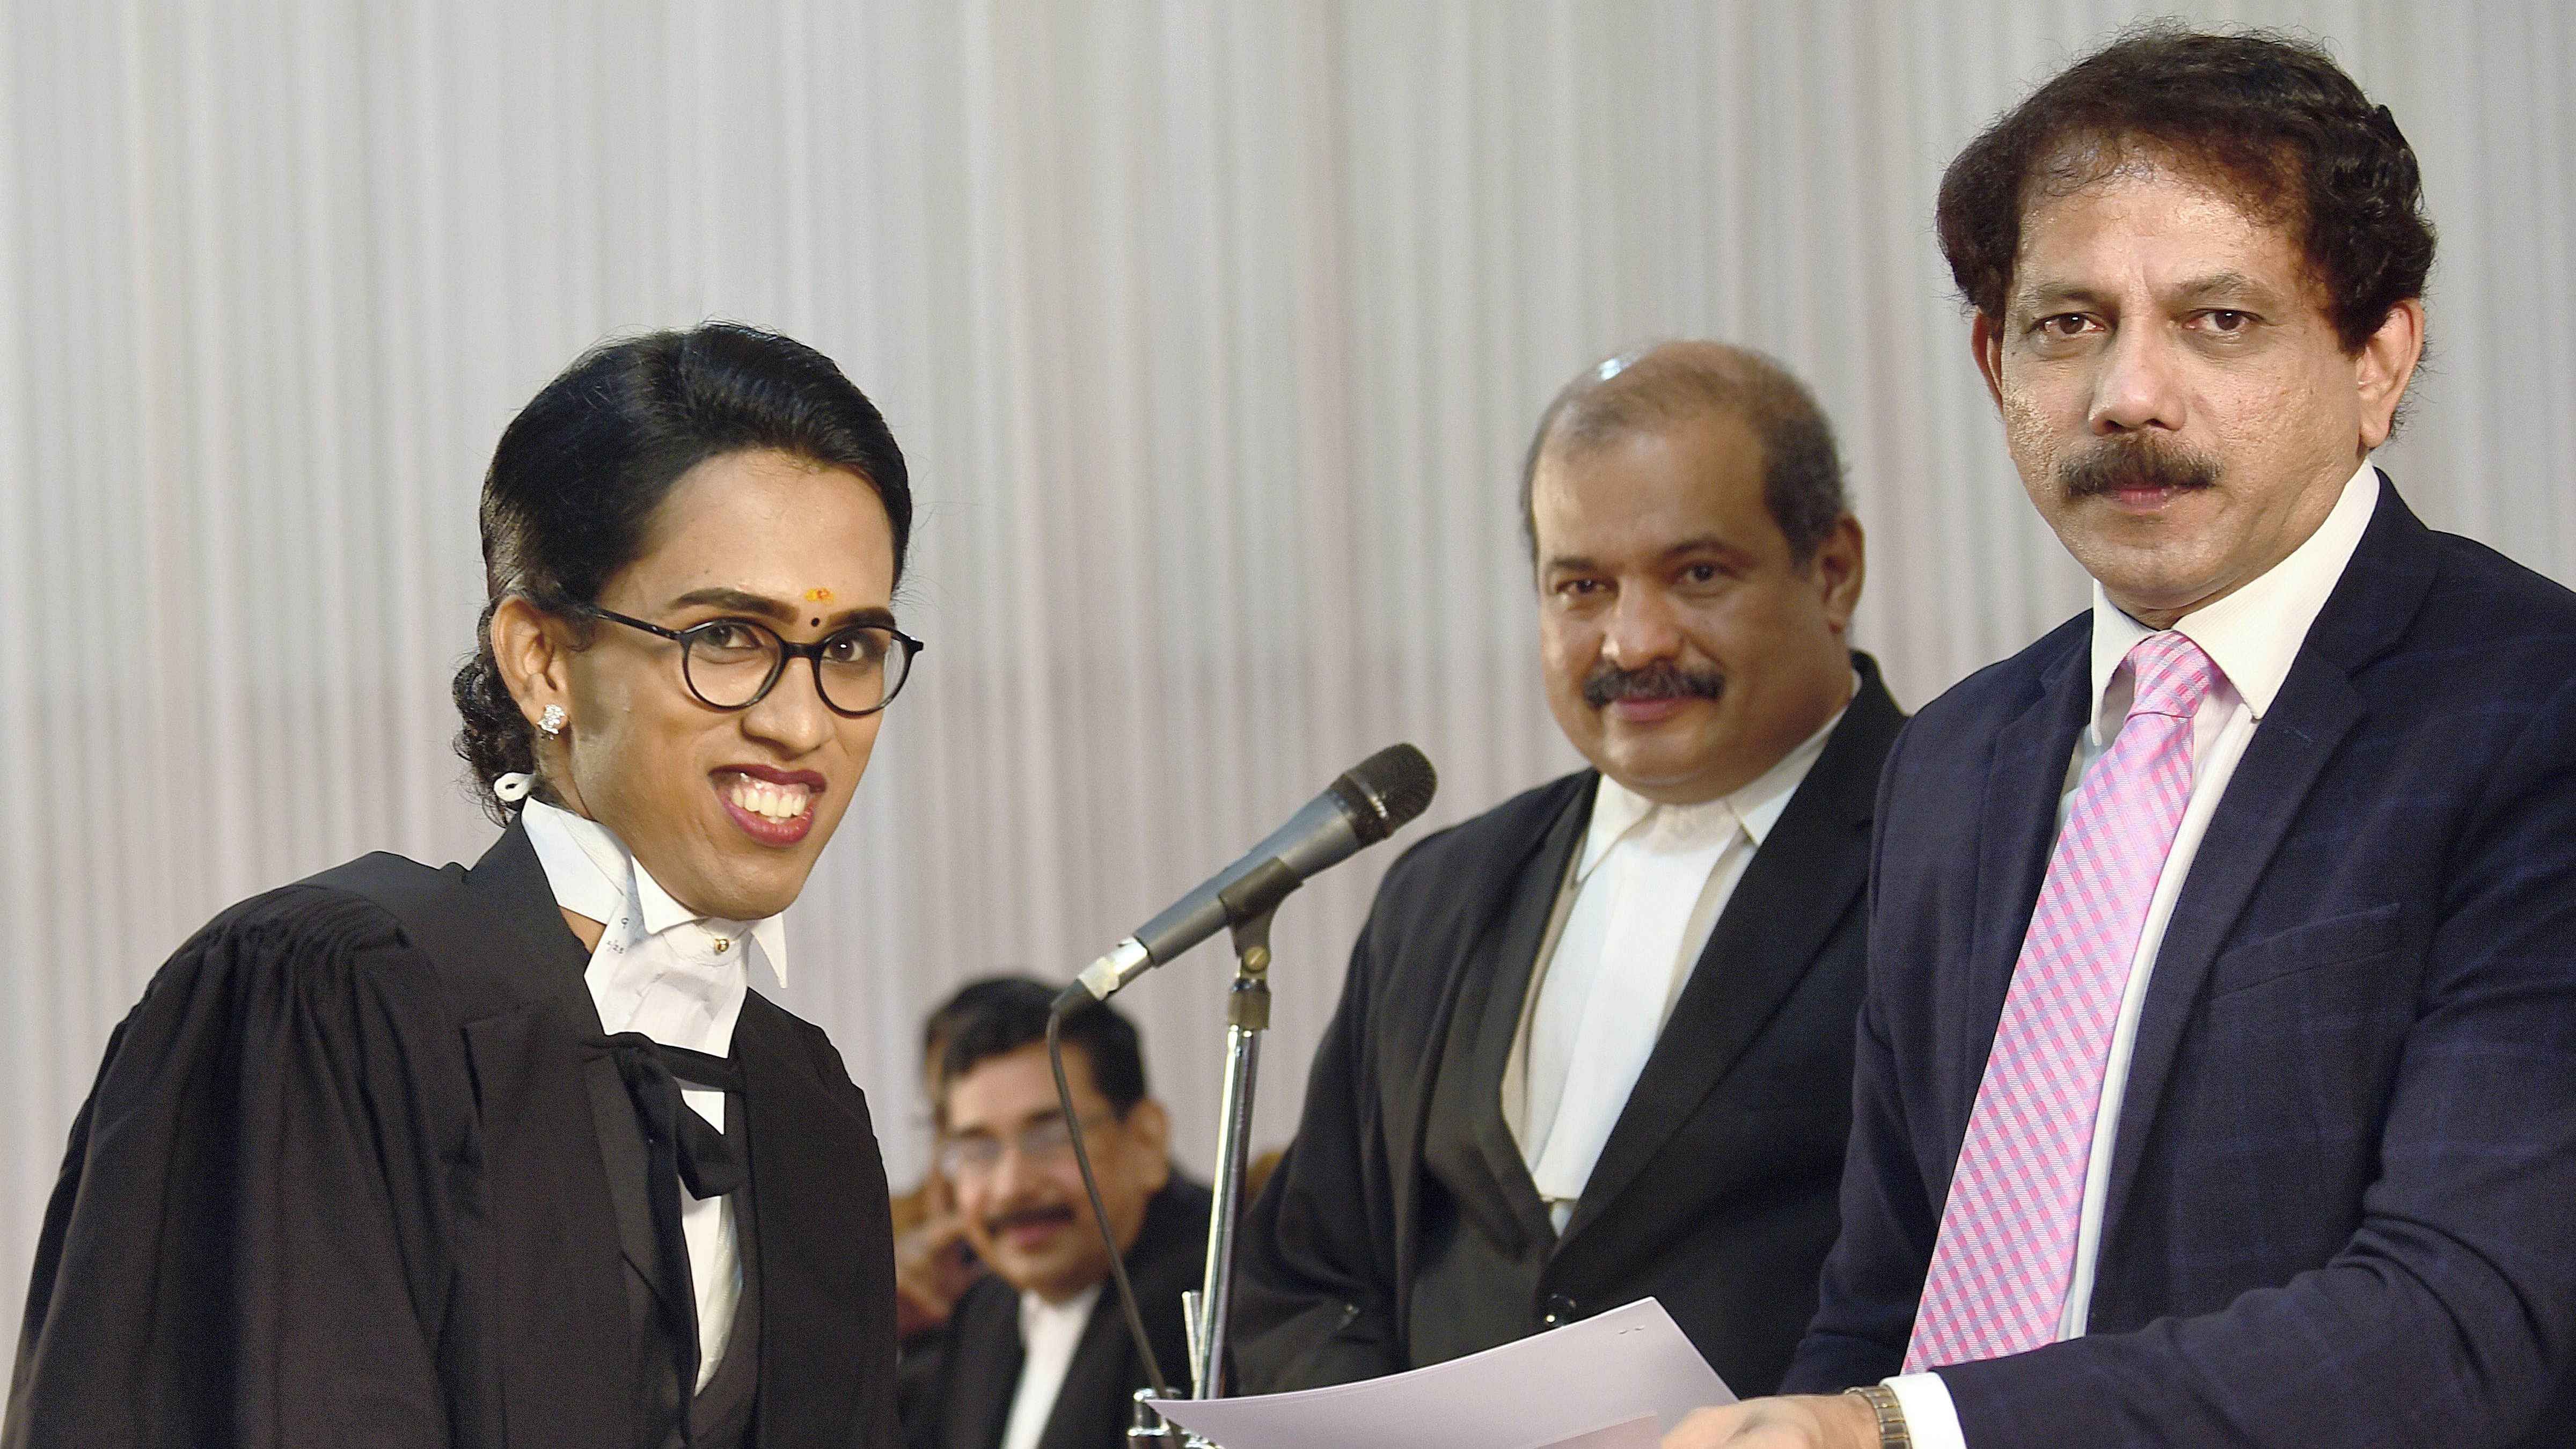 Transgender Padma Lakshmi receives provisional certificate from Justice CS Dias, High Court of Kerala, at the enrollment ceremony at the Kerala High Court, in Kochi. Credit: PTI Photo